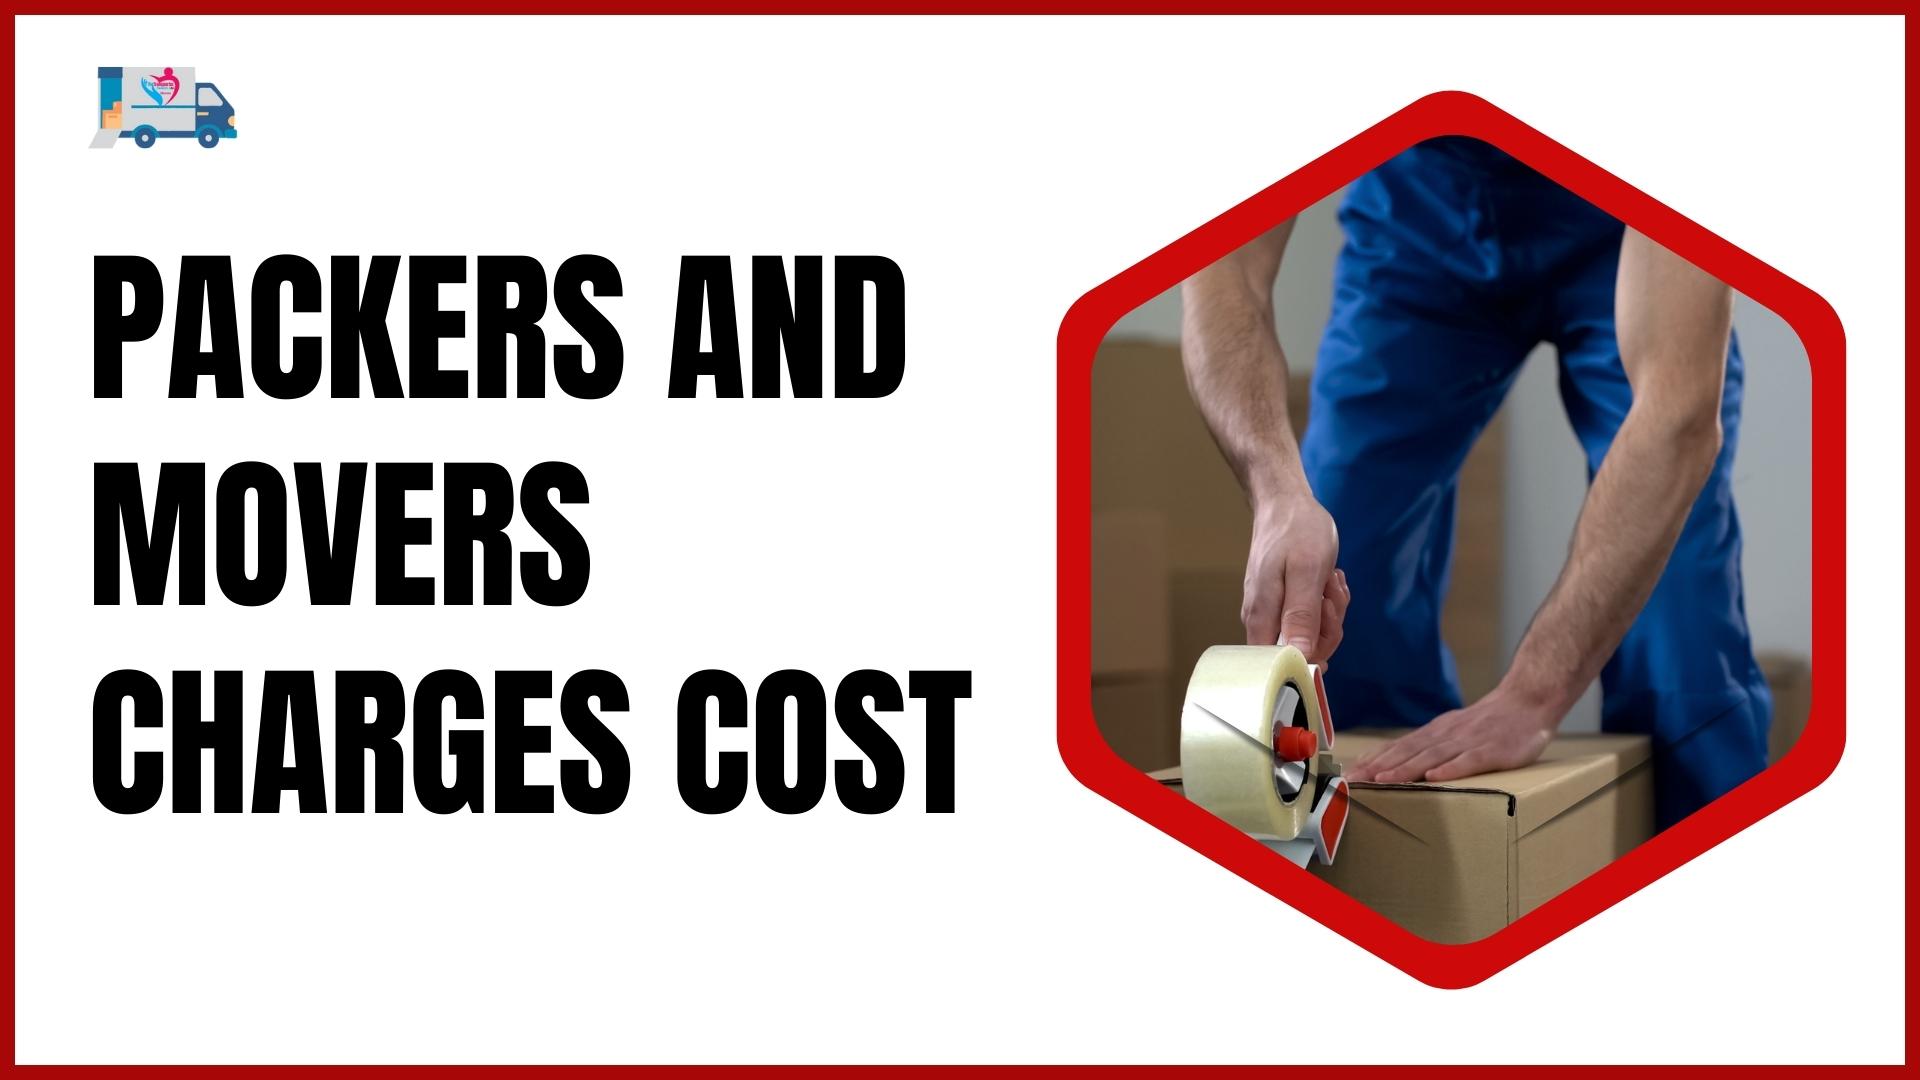 Packers and Movers offers competitive movers and packers Guntur rates and excellent services